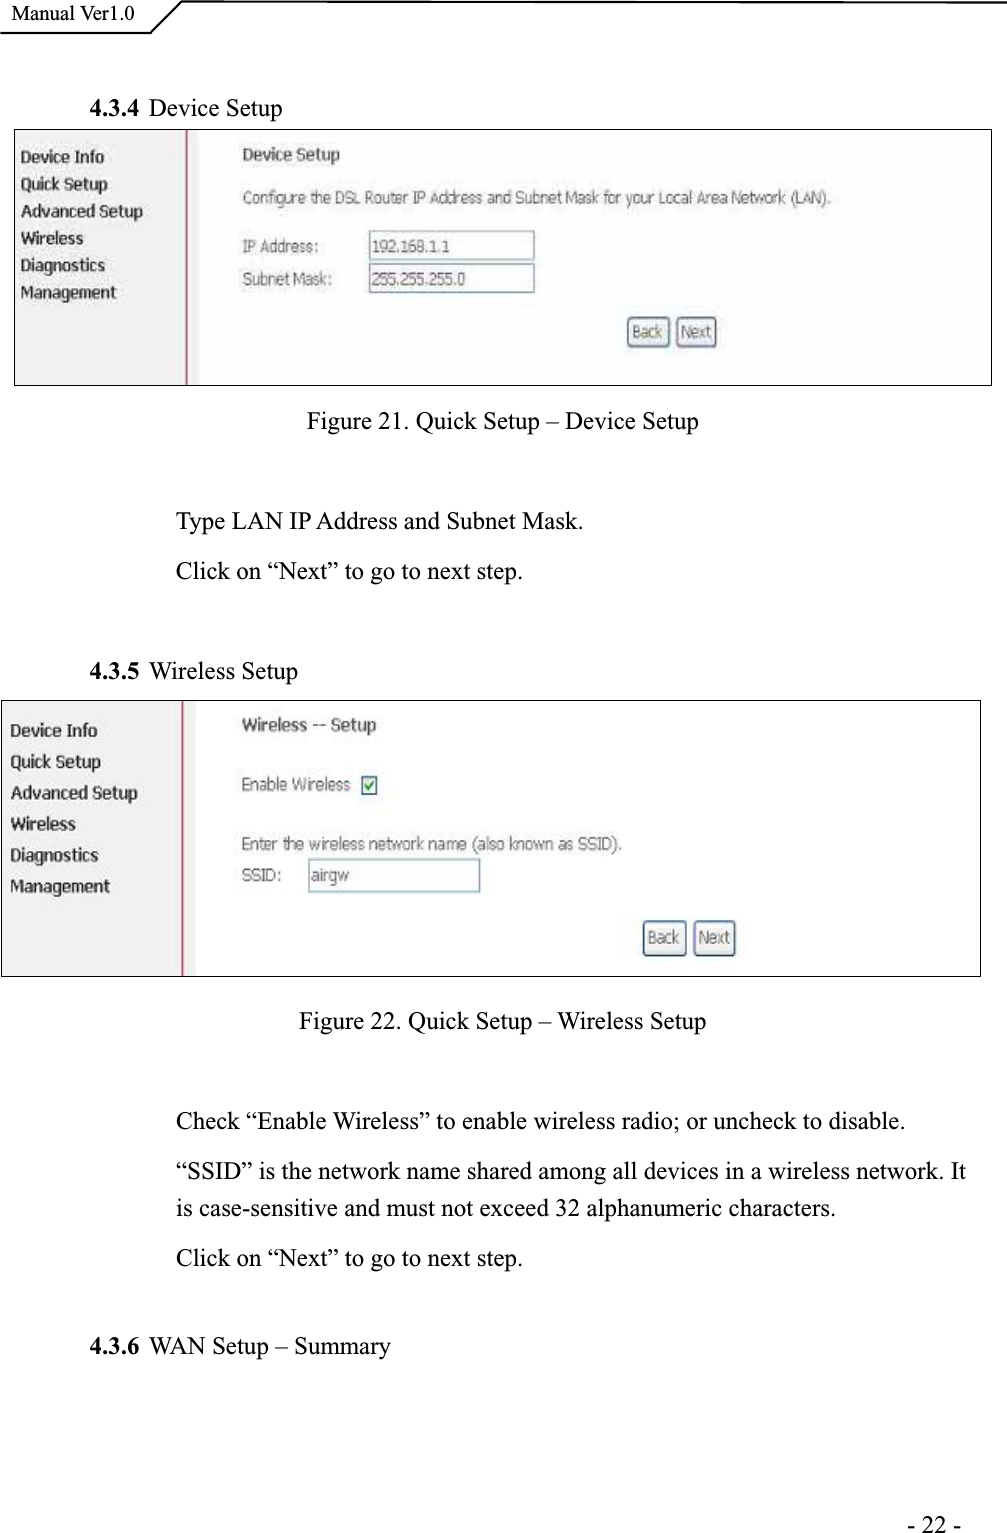  Manual Ver1.04.3.4 Device Setup Figure 21. Quick Setup – Device Setup Type LAN IP Address and Subnet Mask. Click on “Next” to go to next step. 4.3.5 Wireless Setup Figure 22. Quick Setup – Wireless Setup Check “Enable Wireless” to enable wireless radio; or uncheck to disable. “SSID” is the network name shared among all devices in a wireless network. It is case-sensitive and must not exceed 32 alphanumeric characters. Click on “Next” to go to next step.4.3.6 WAN Setup – Summary                                                                     -22-